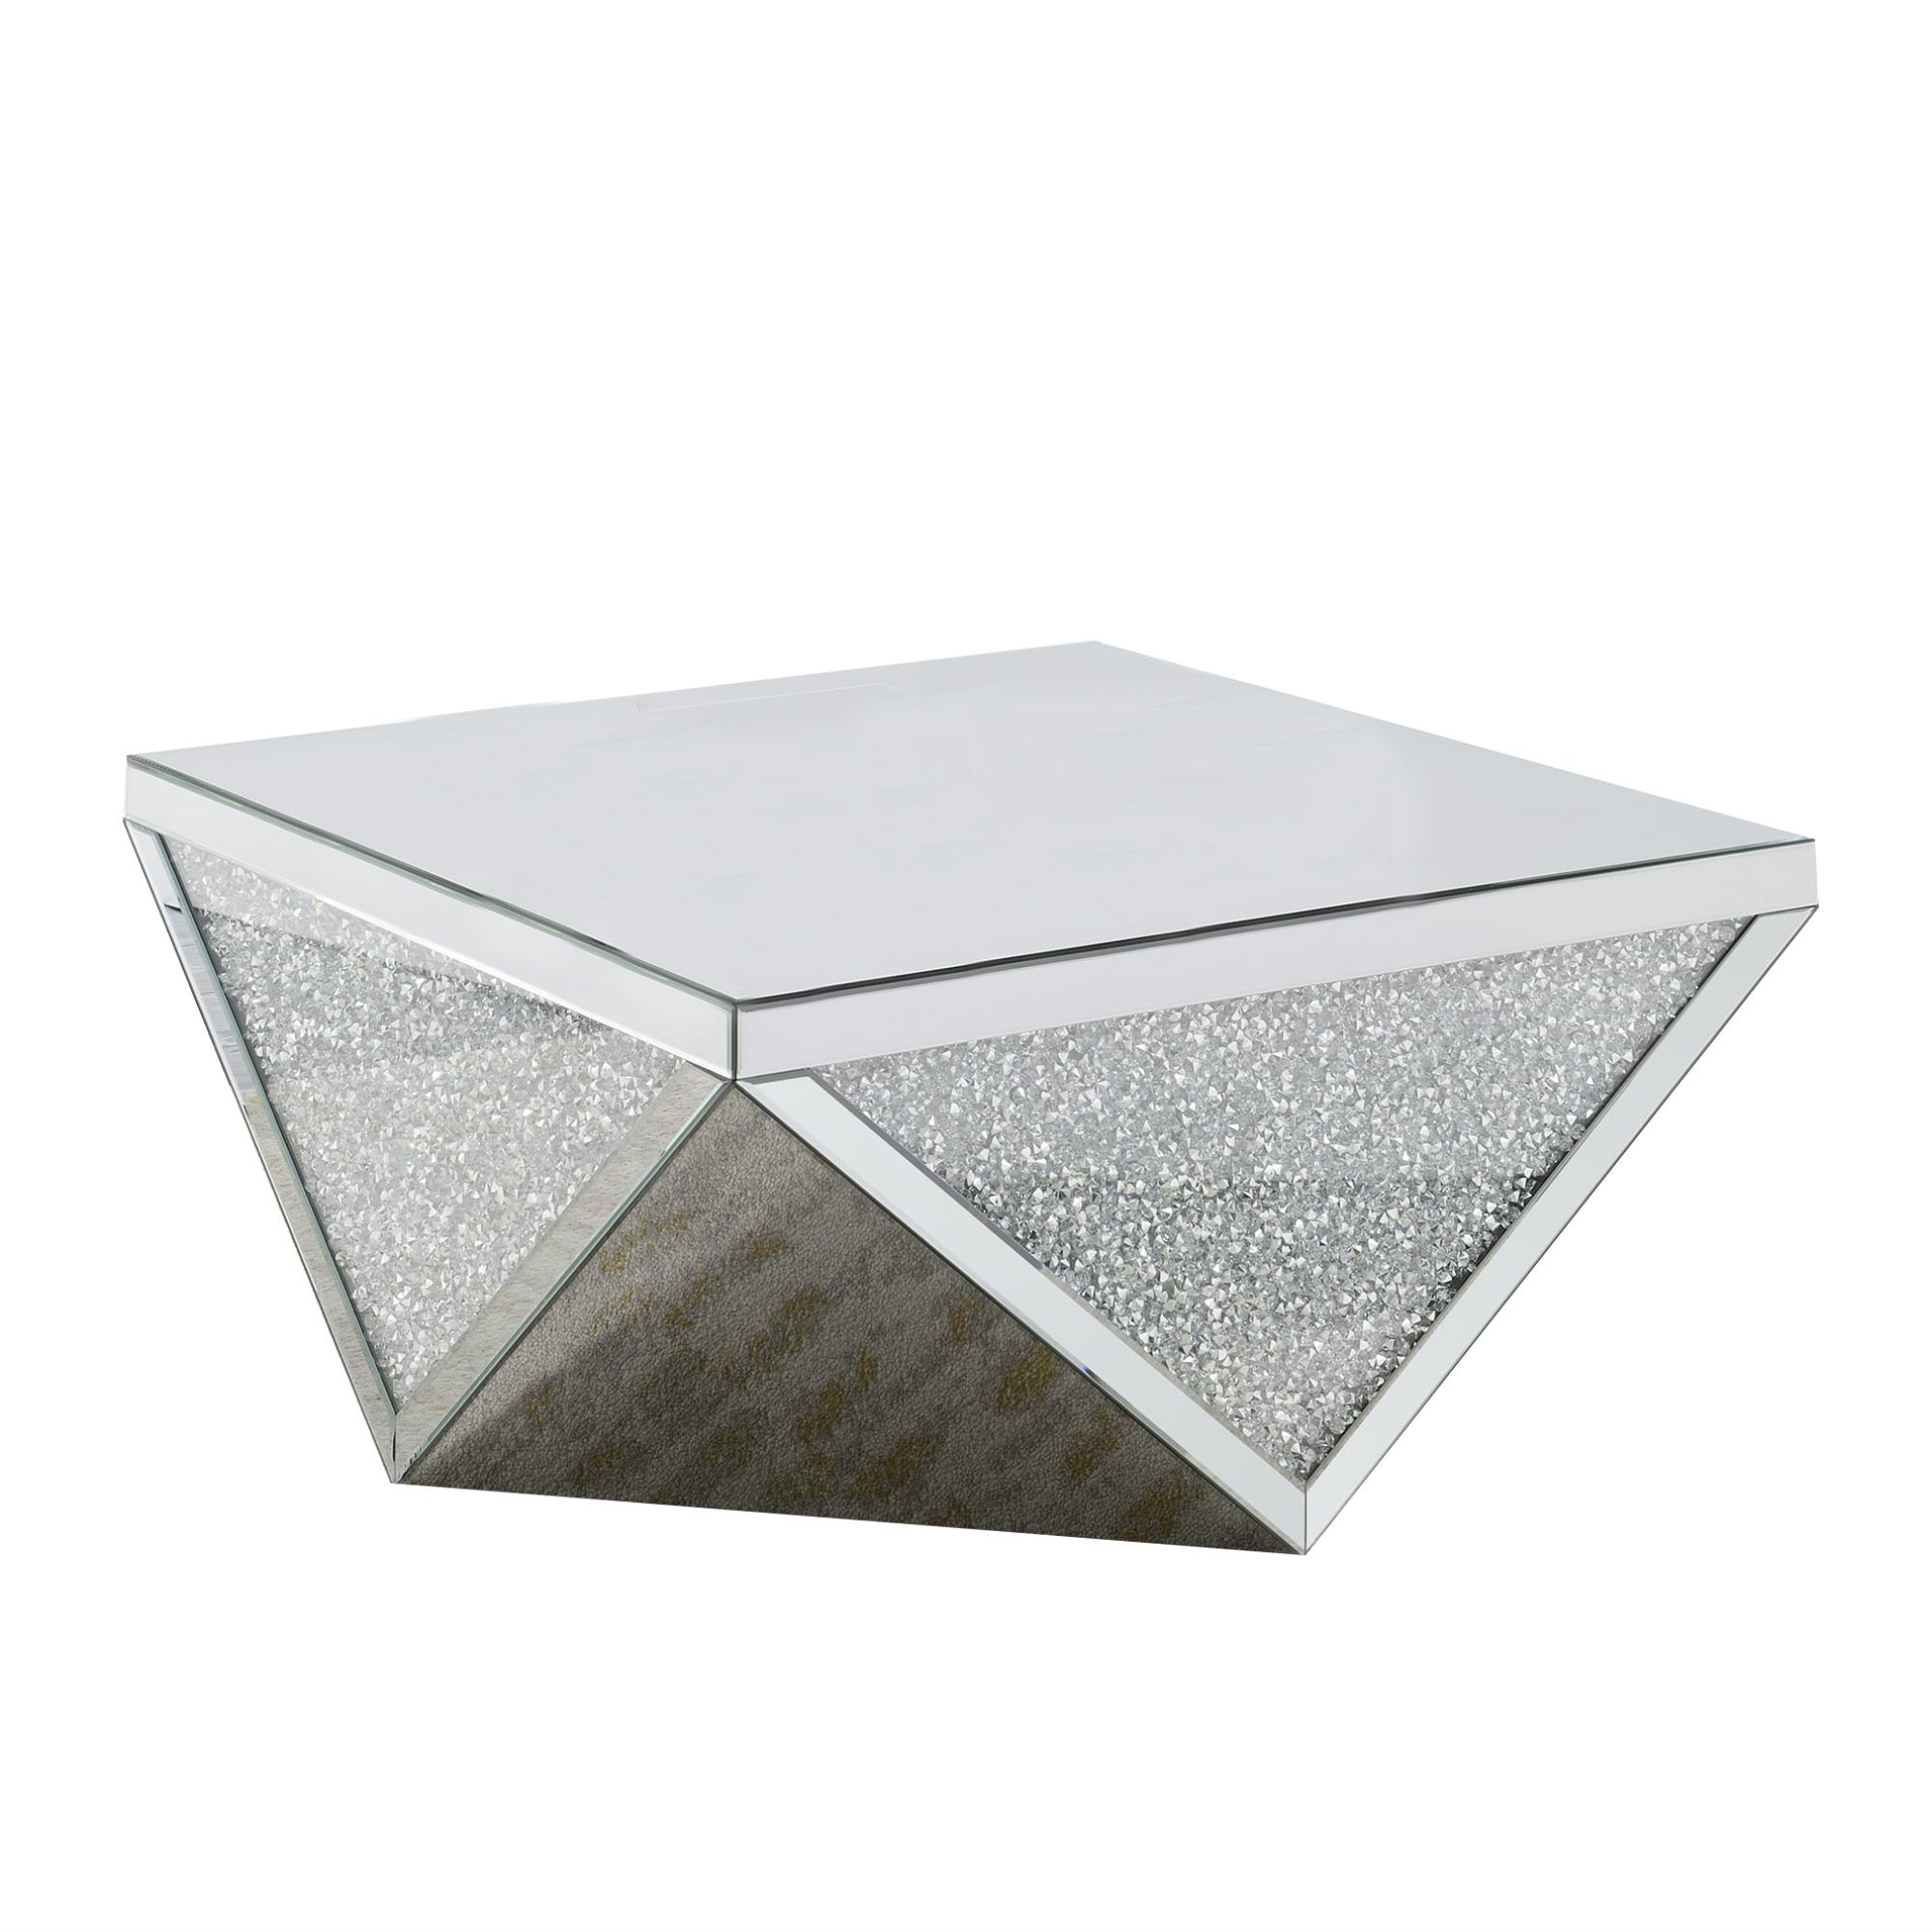 Wood And Mirror Coffee Table In Diamond Shape With Crystal Inserts, Silver  – Walmart Regarding Diamond Shape Coffee Tables (View 10 of 15)